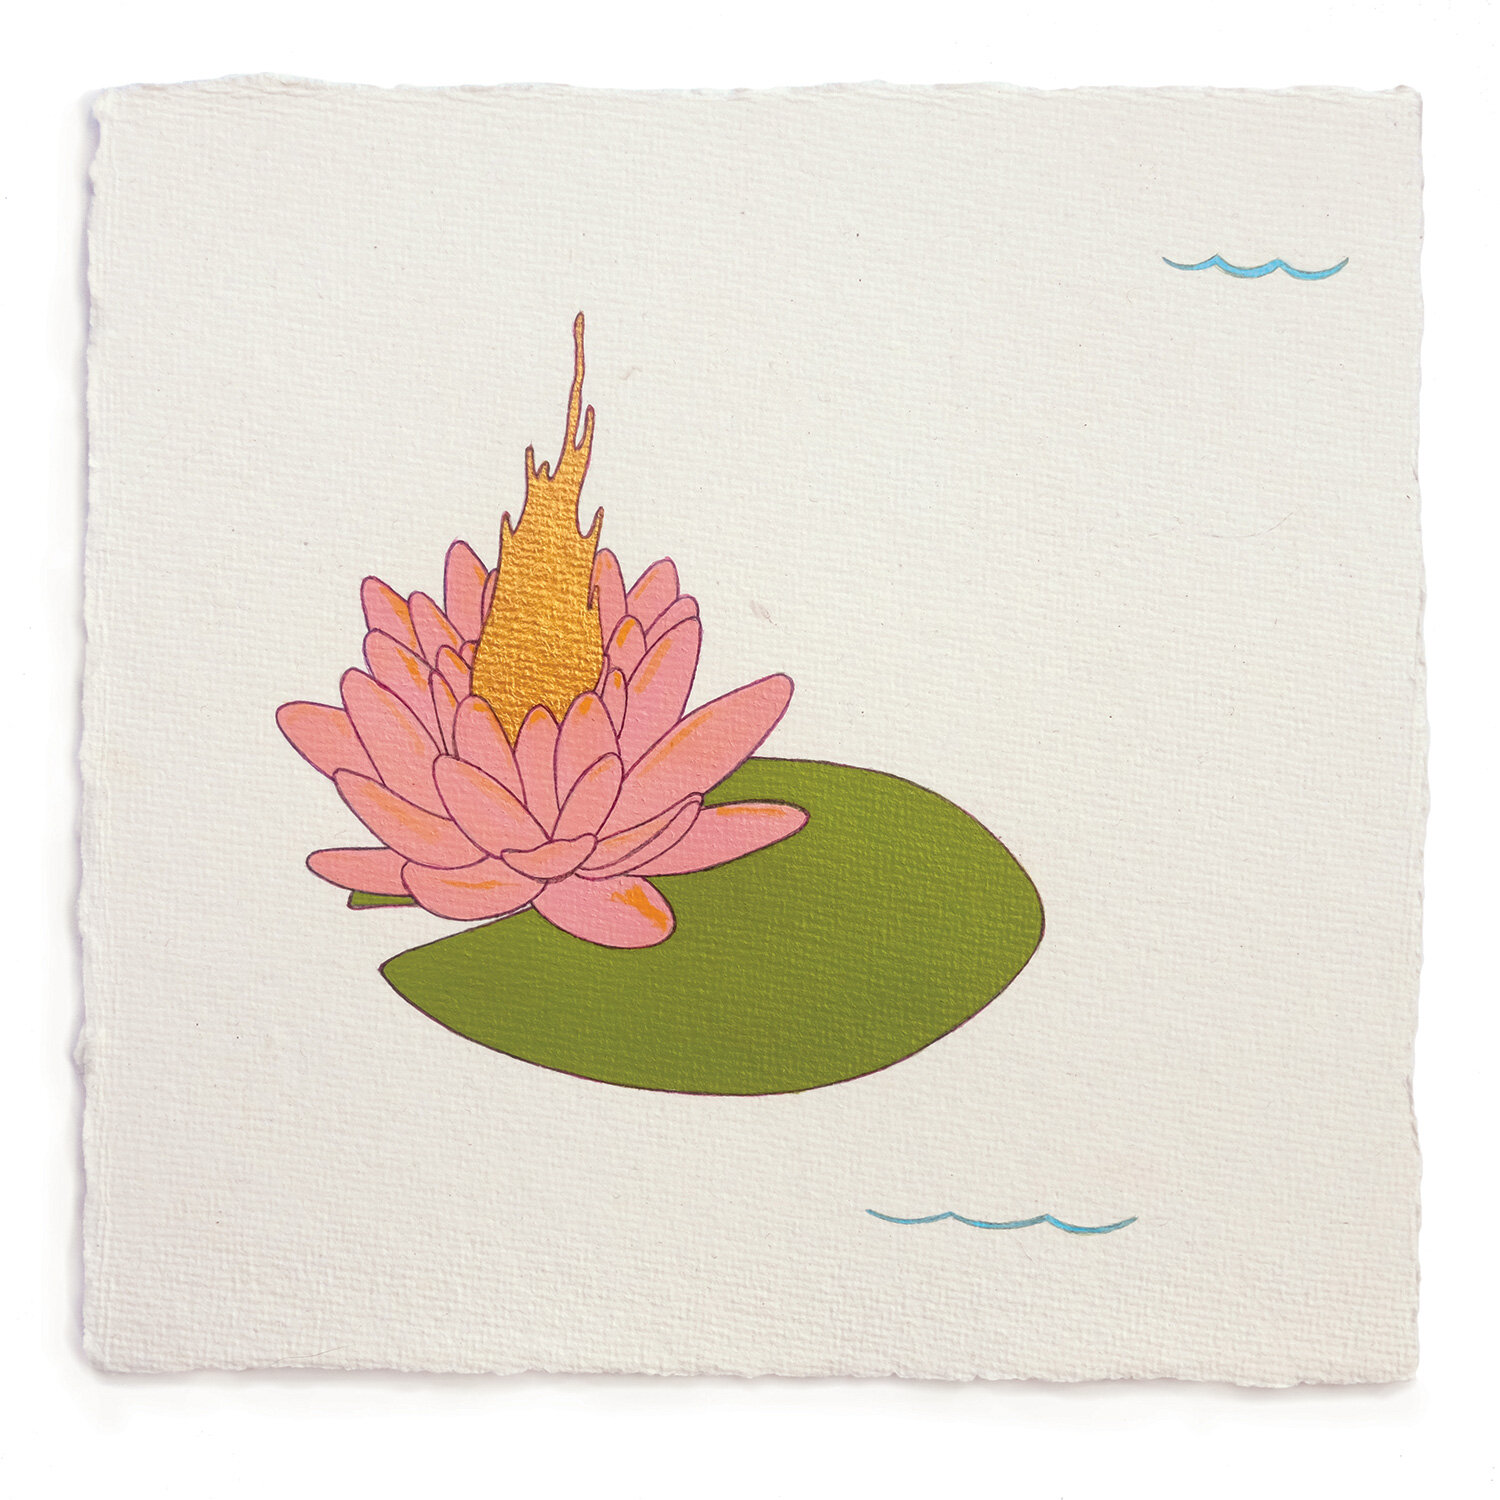   Fire Diary (Water Lilies), &nbsp;2020 Acrylic on paper, 6” x 6” each 